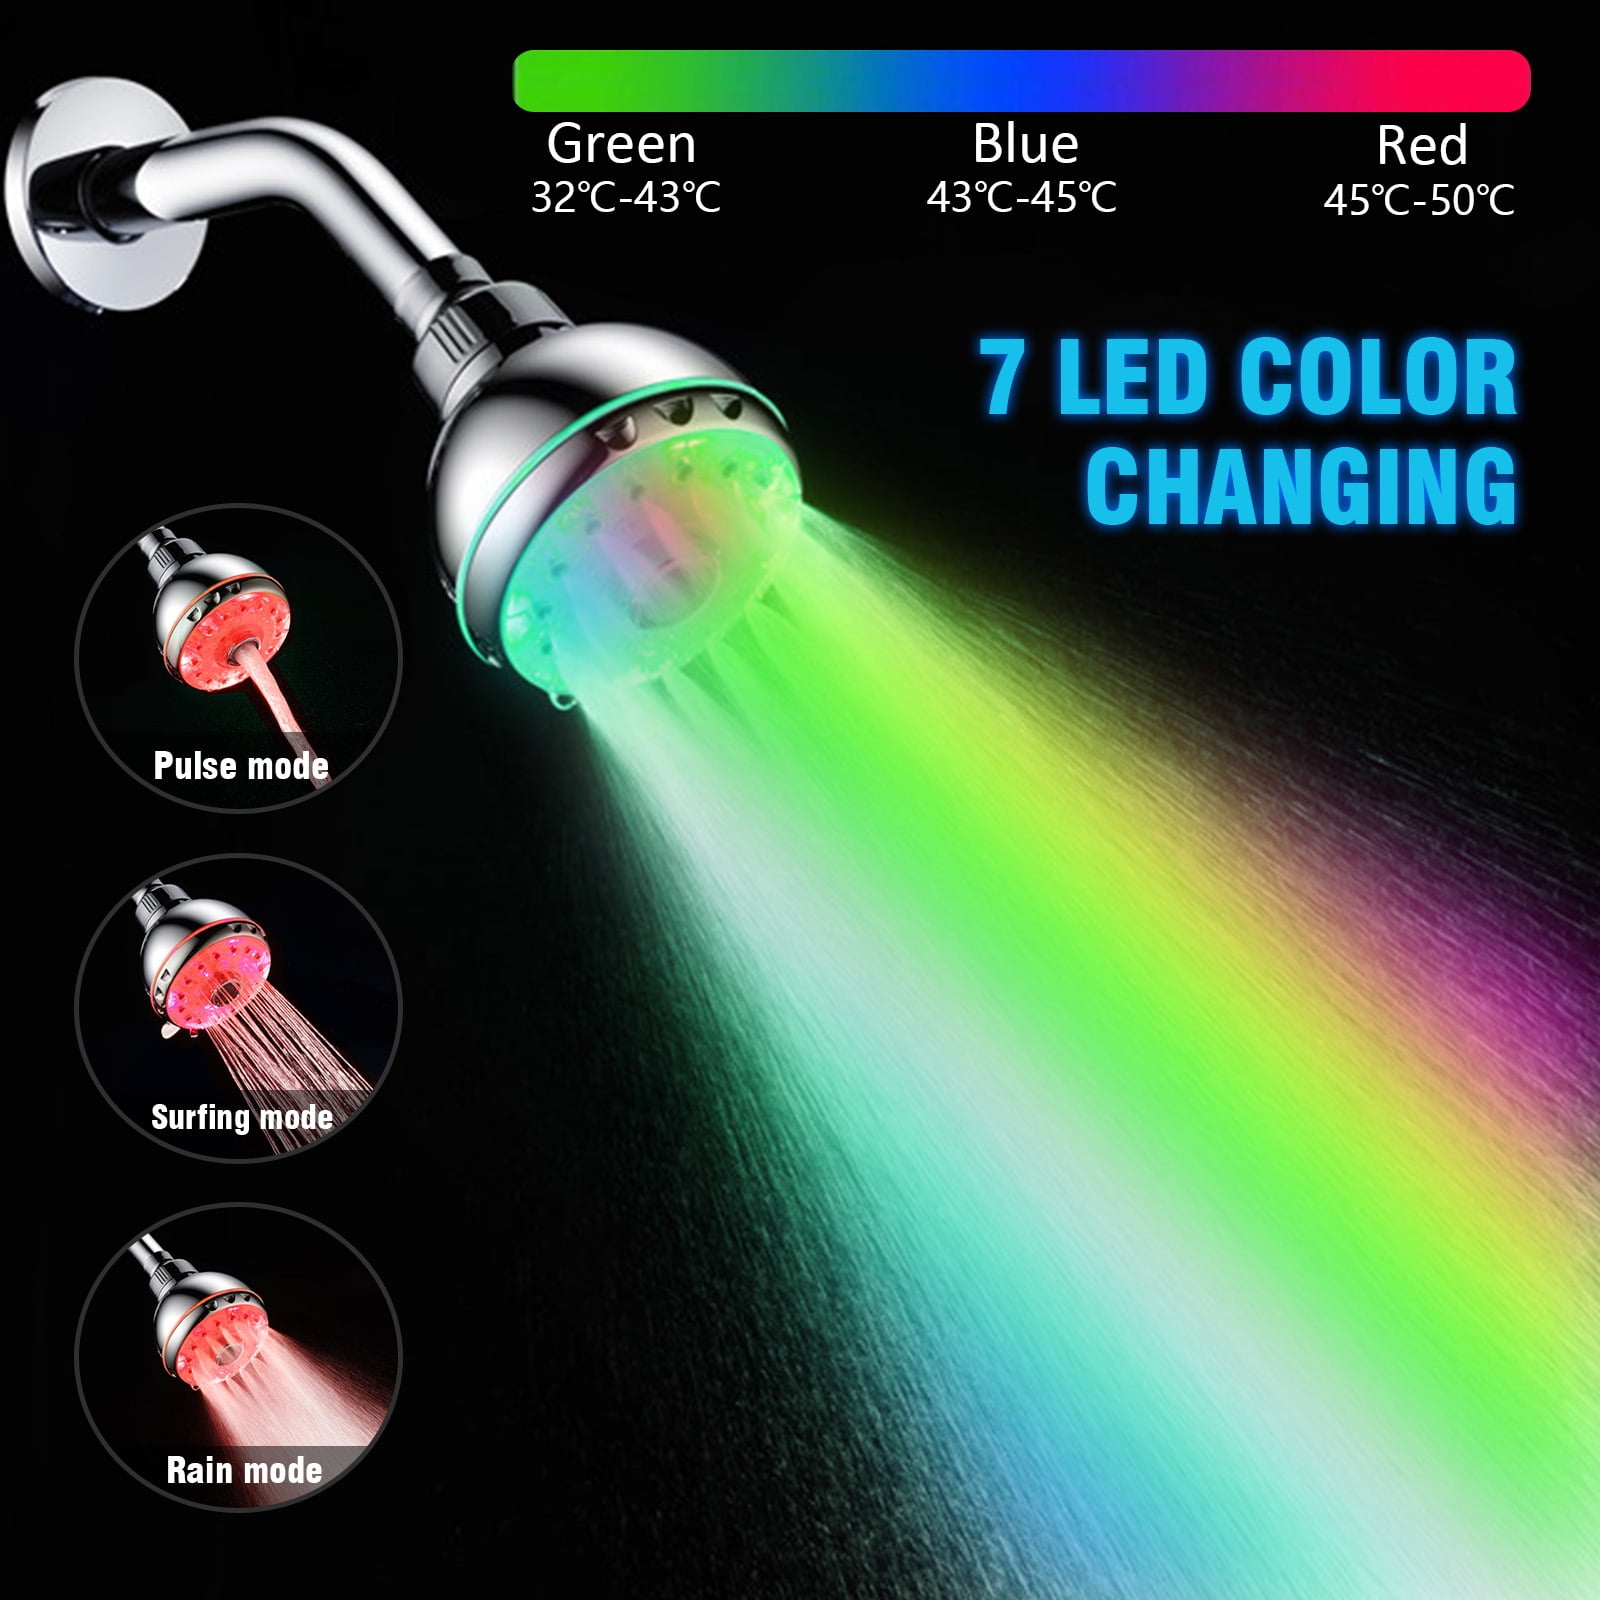 Details about   LED SHOWER HEAD Handheld 7 Color Changing Showerhead Polished Chrome By KAIREY 